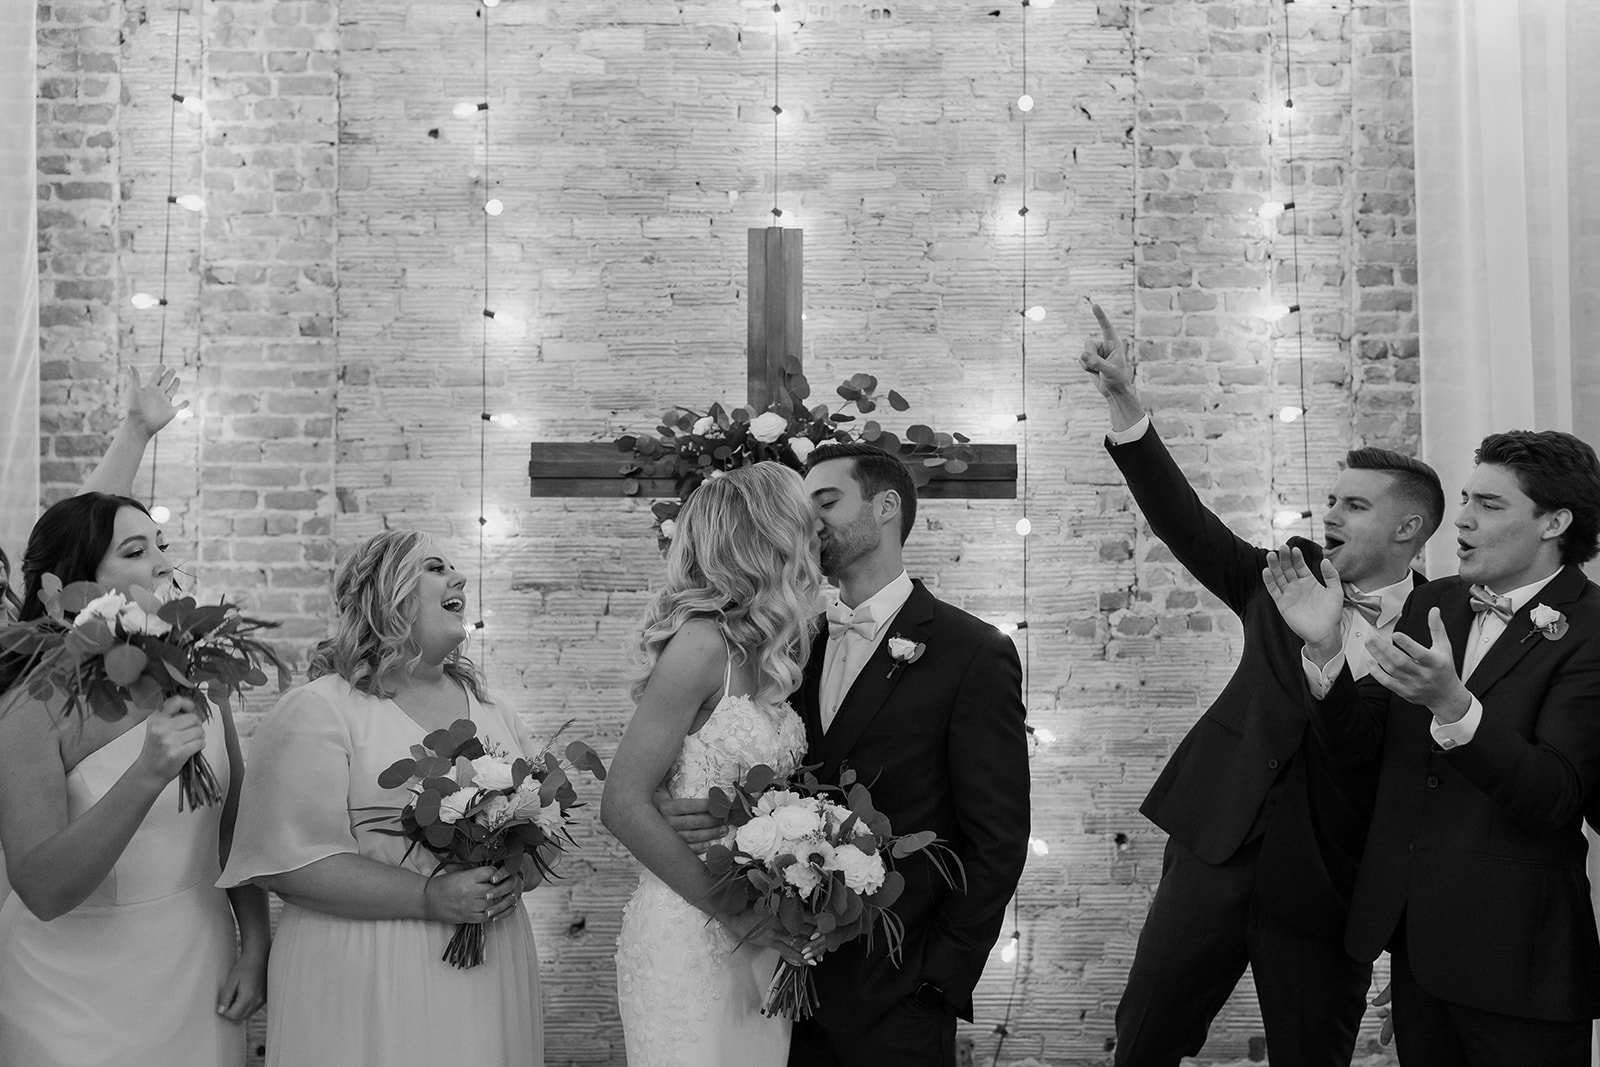 Bride and groom share a kiss as all of their bridesmaids and groomsmen cheer.